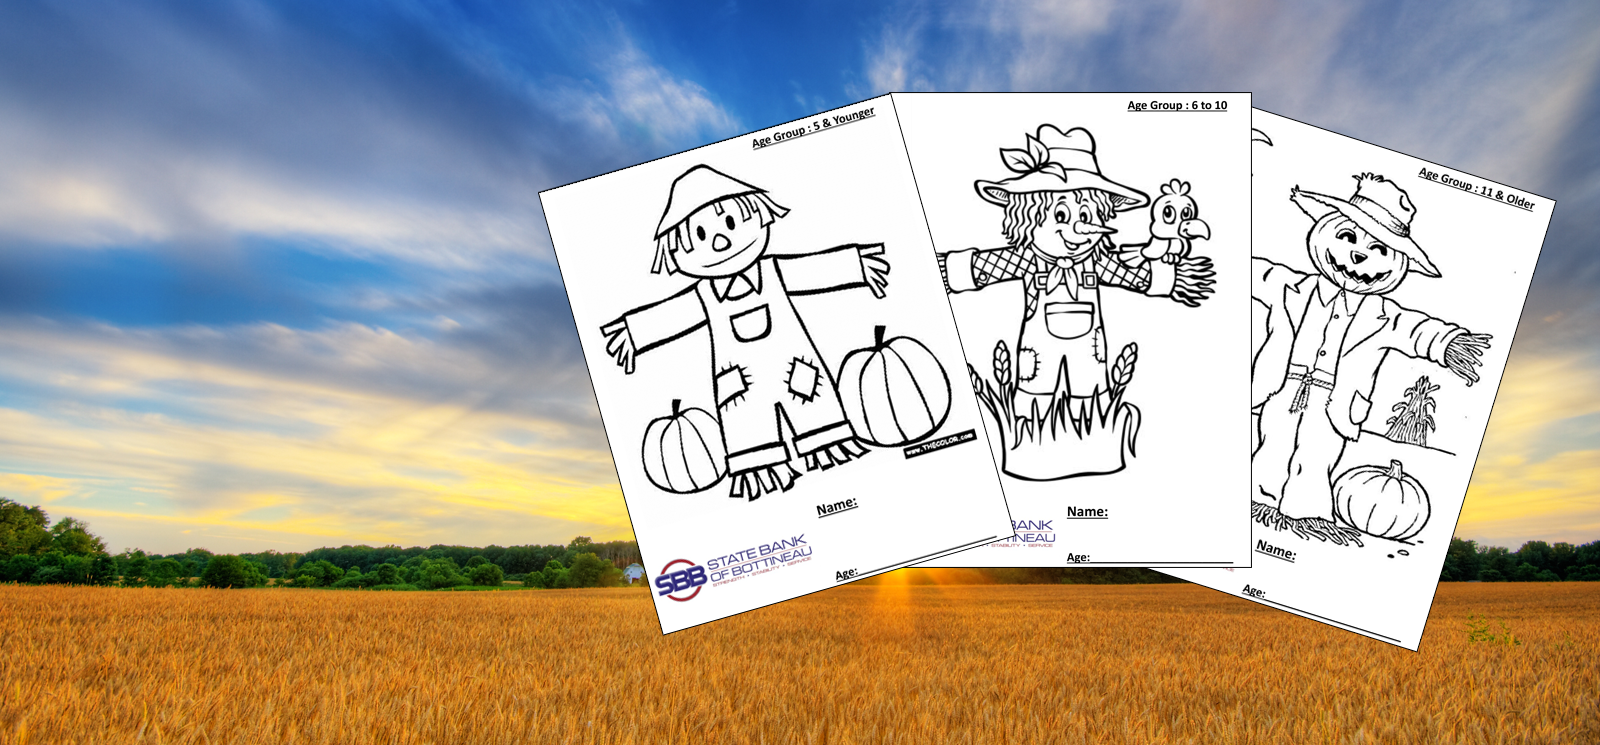 Image of wheat field with coloring contest pictures.